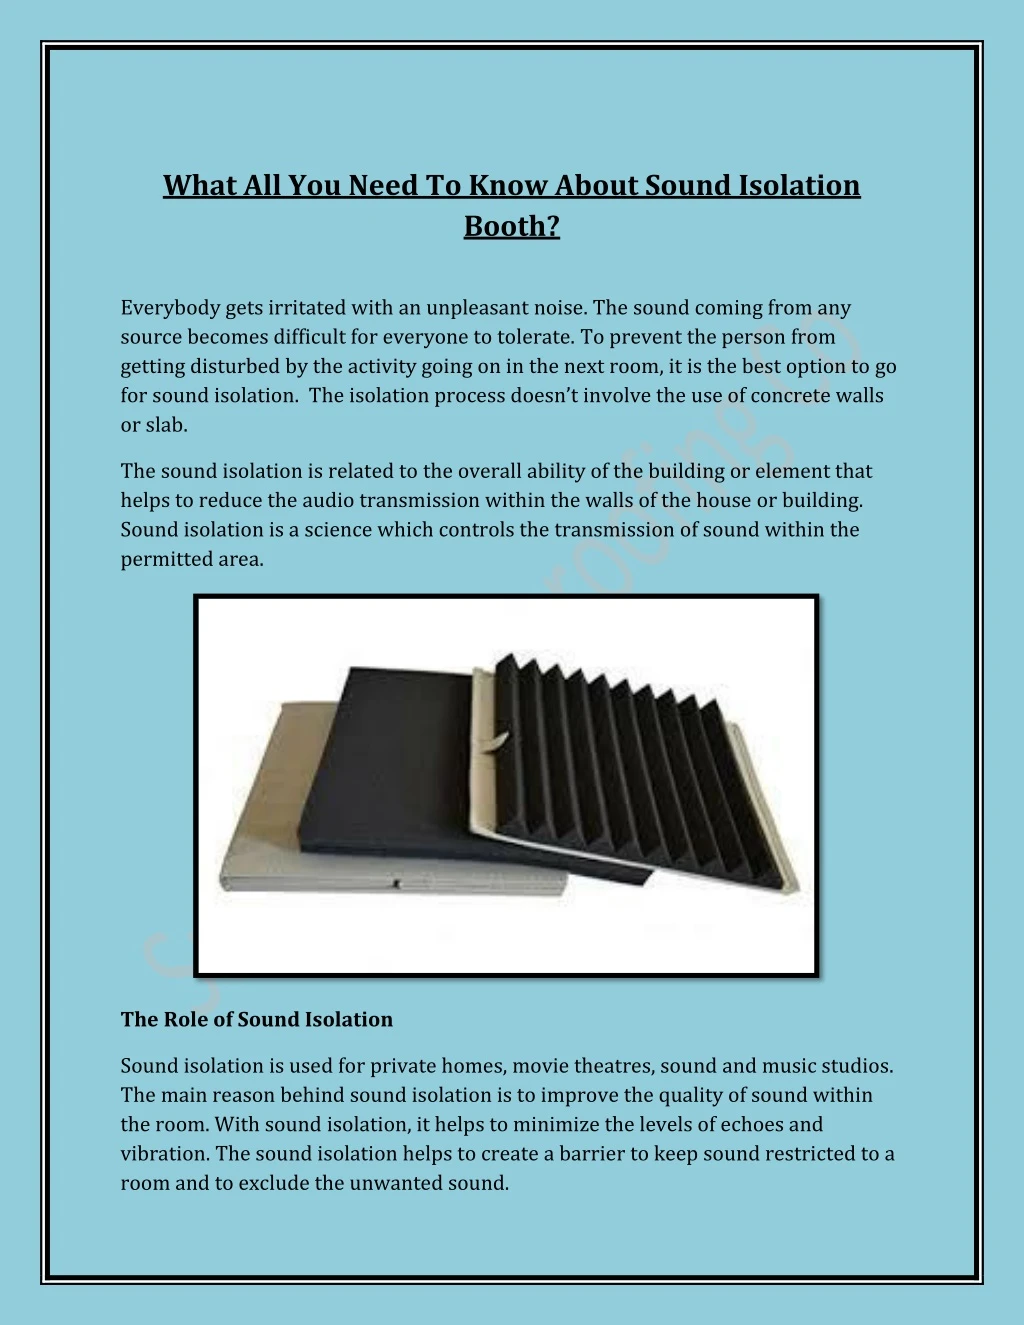 what all you need to know about sound isolation